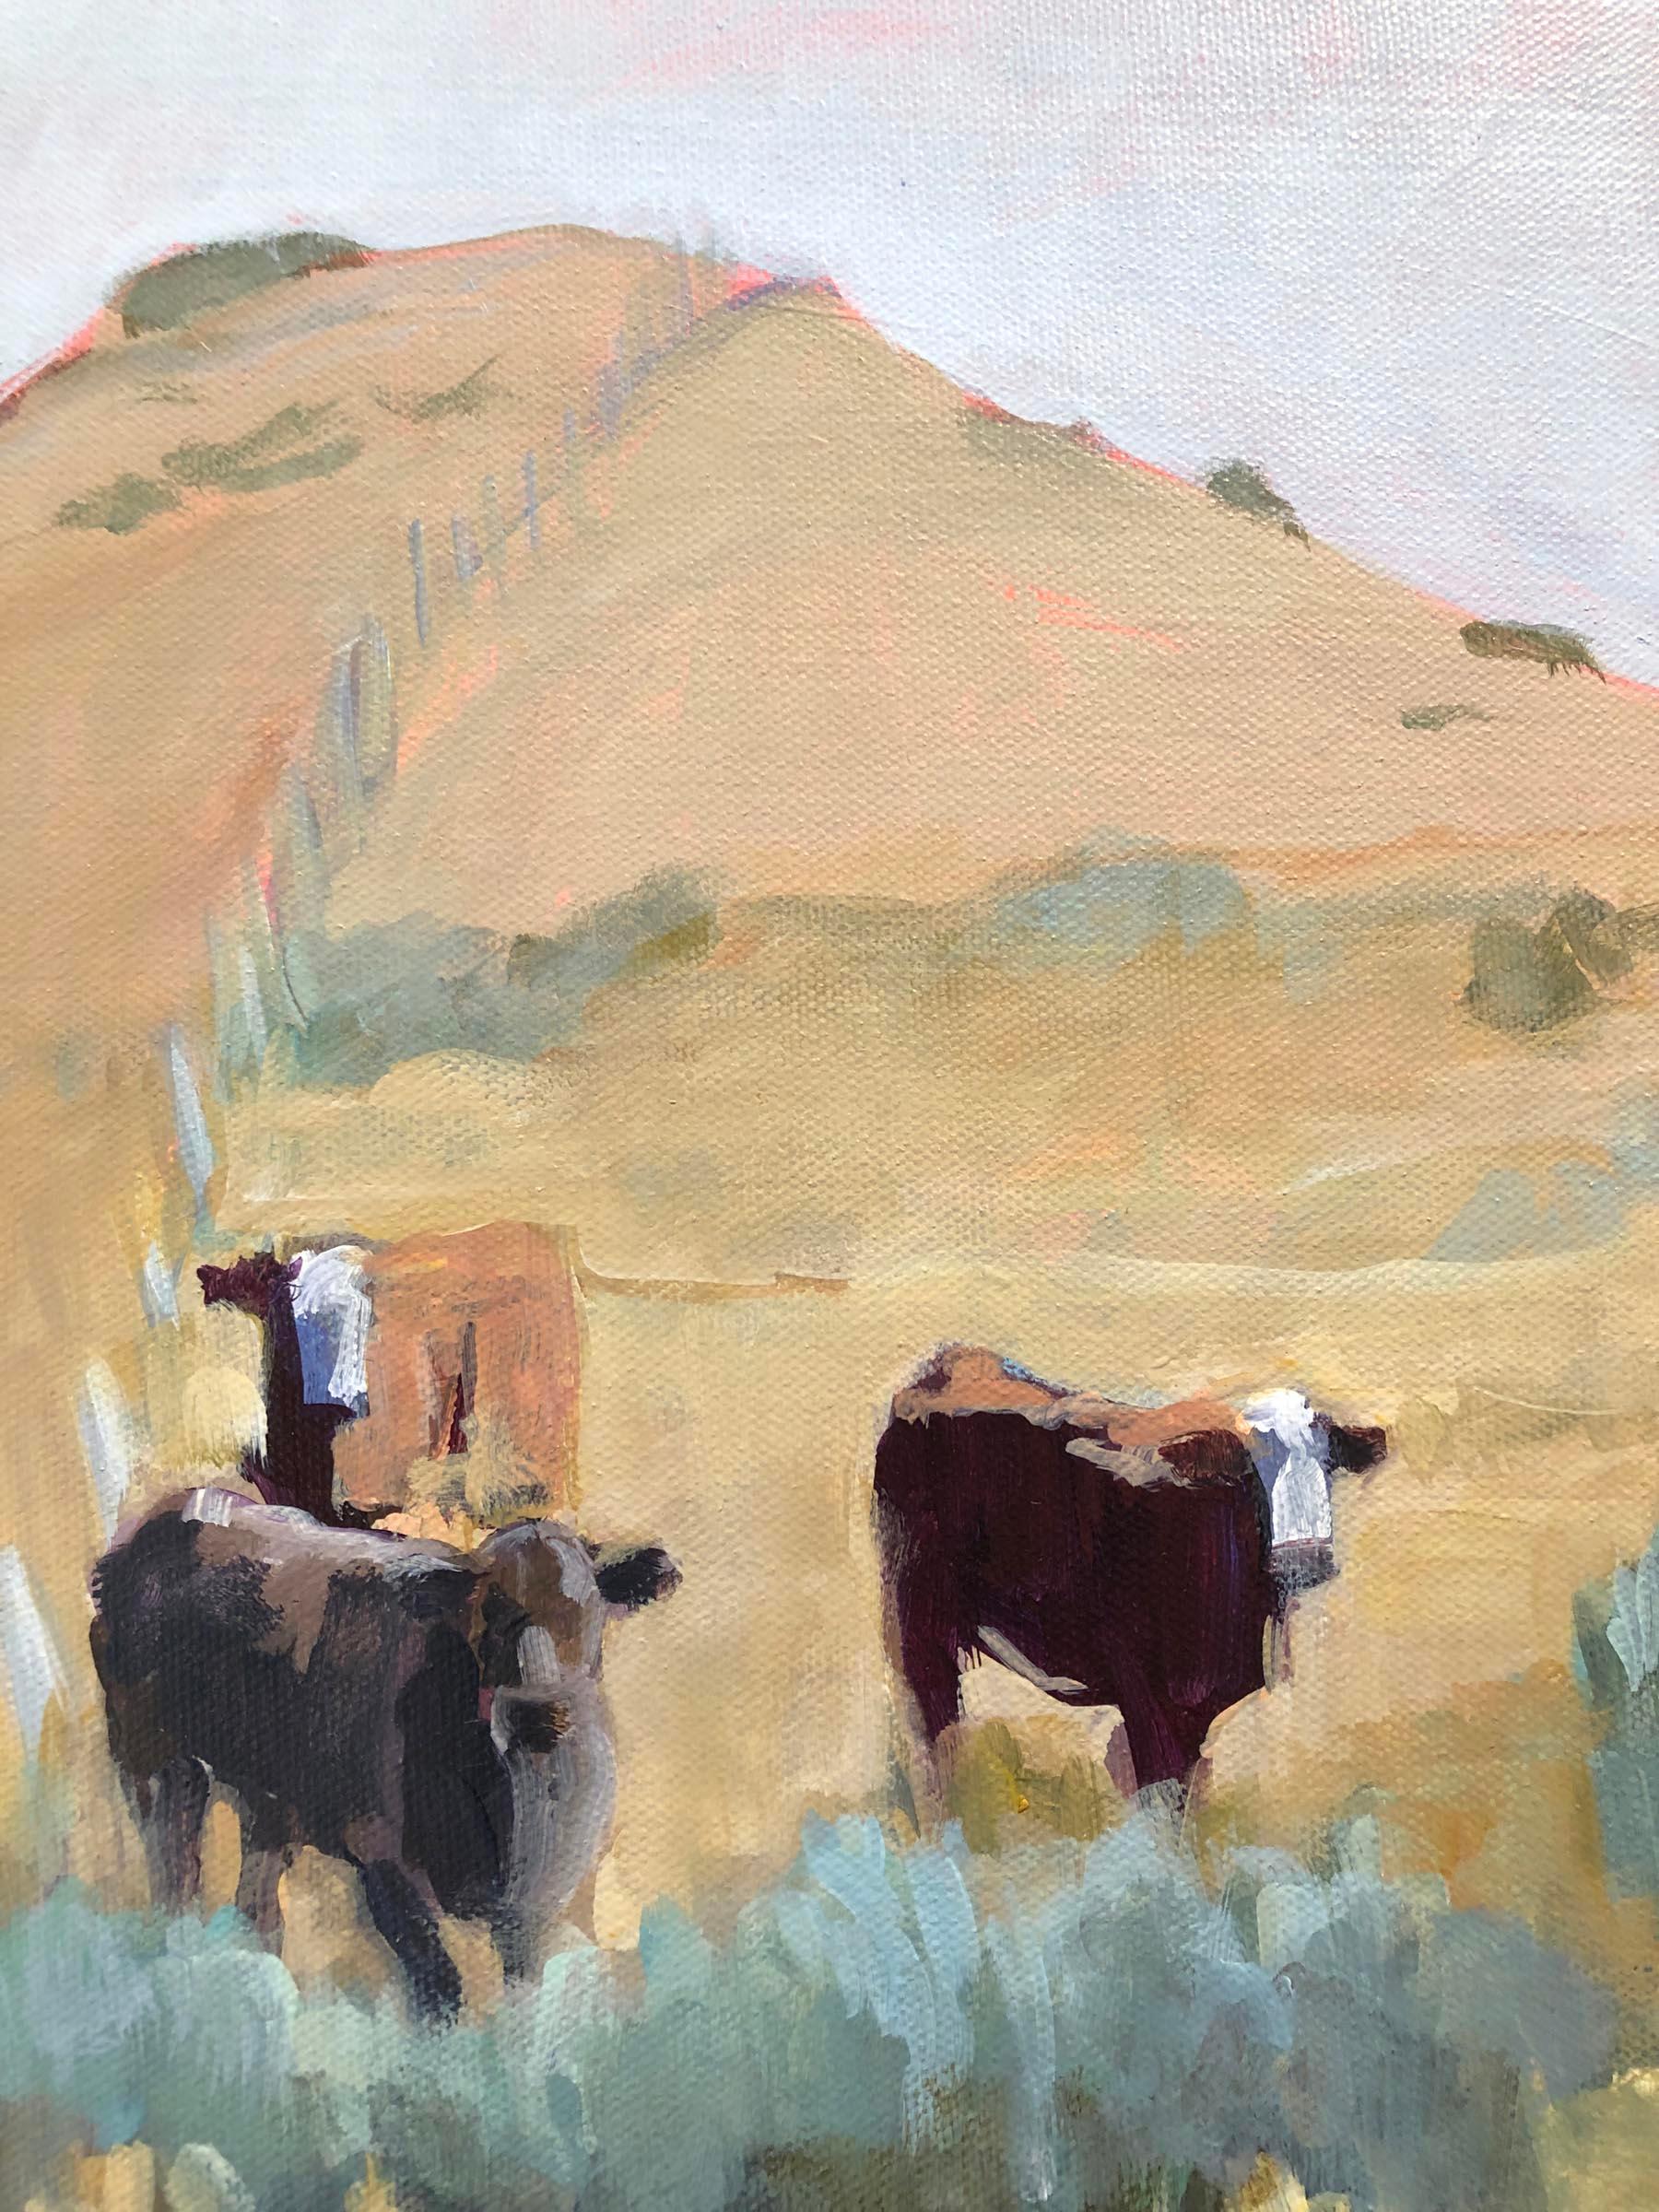 Tall Grass (cows, pasture, golden grasses, sage, tan, pink toned sky) - Painting by Heather Foster